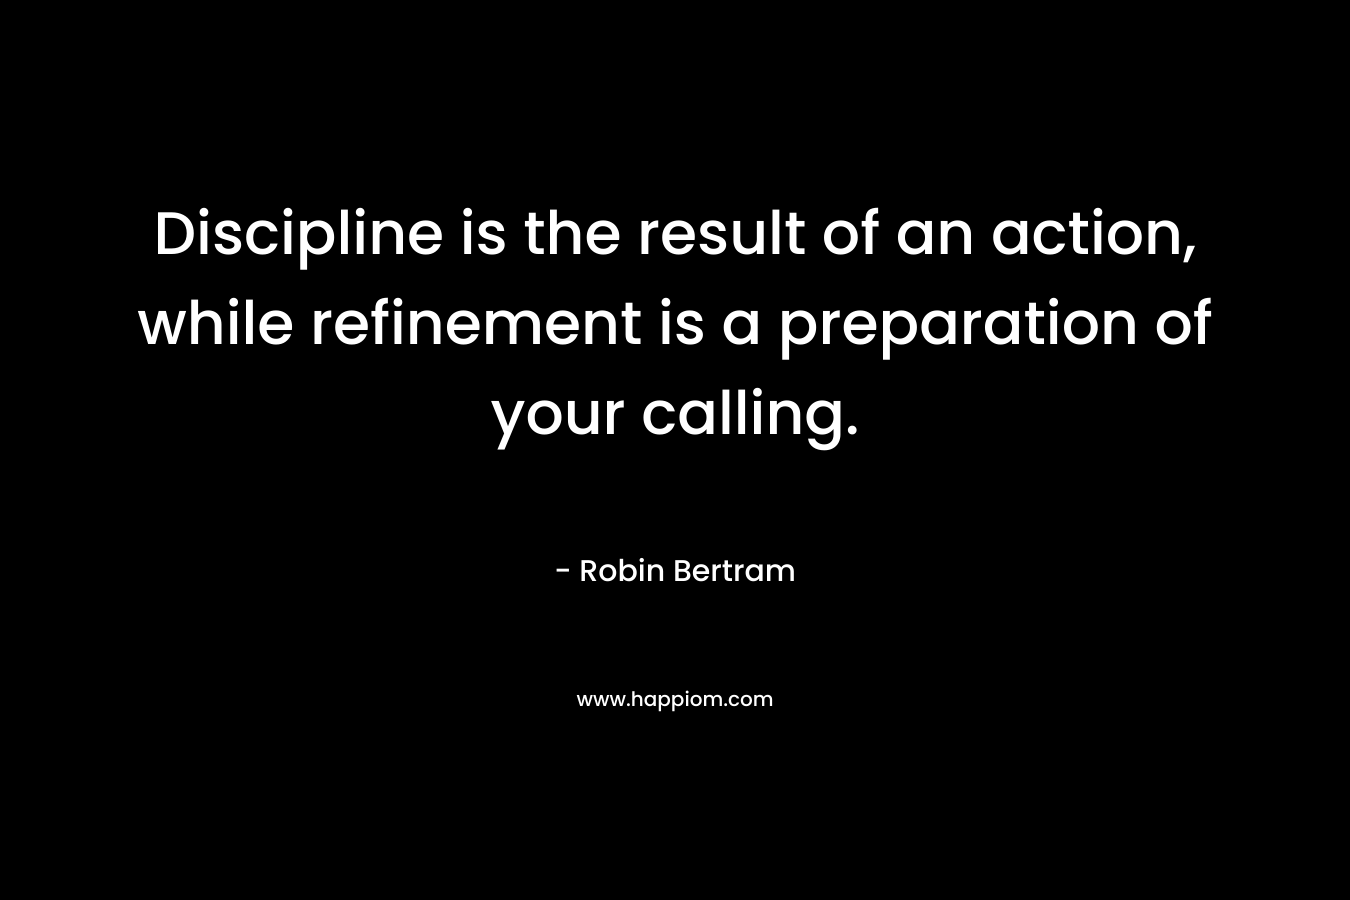 Discipline is the result of an action, while refinement is a preparation of your calling.